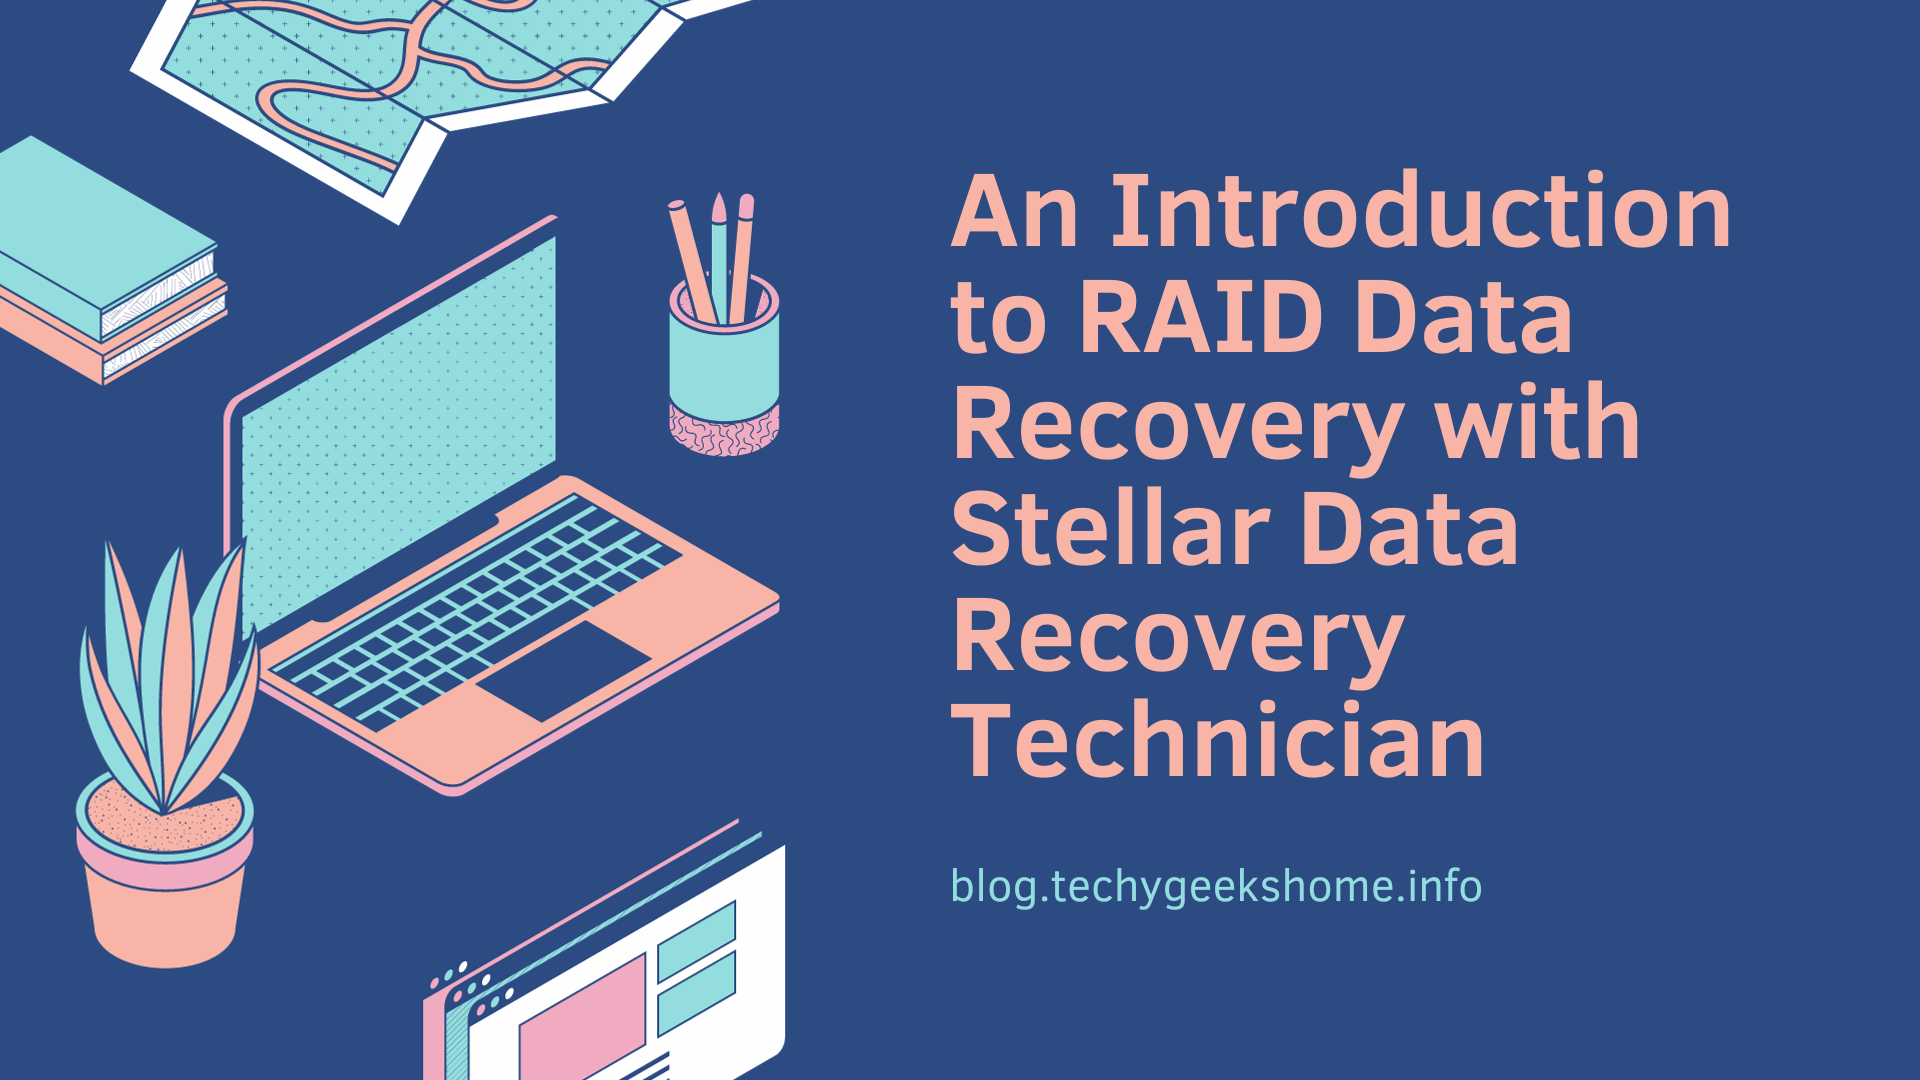 Illustration of a laptop, potted plant, books, map, and stationery on a desk; text promotes an article on RAID data recovery with stellar data recovery technician.